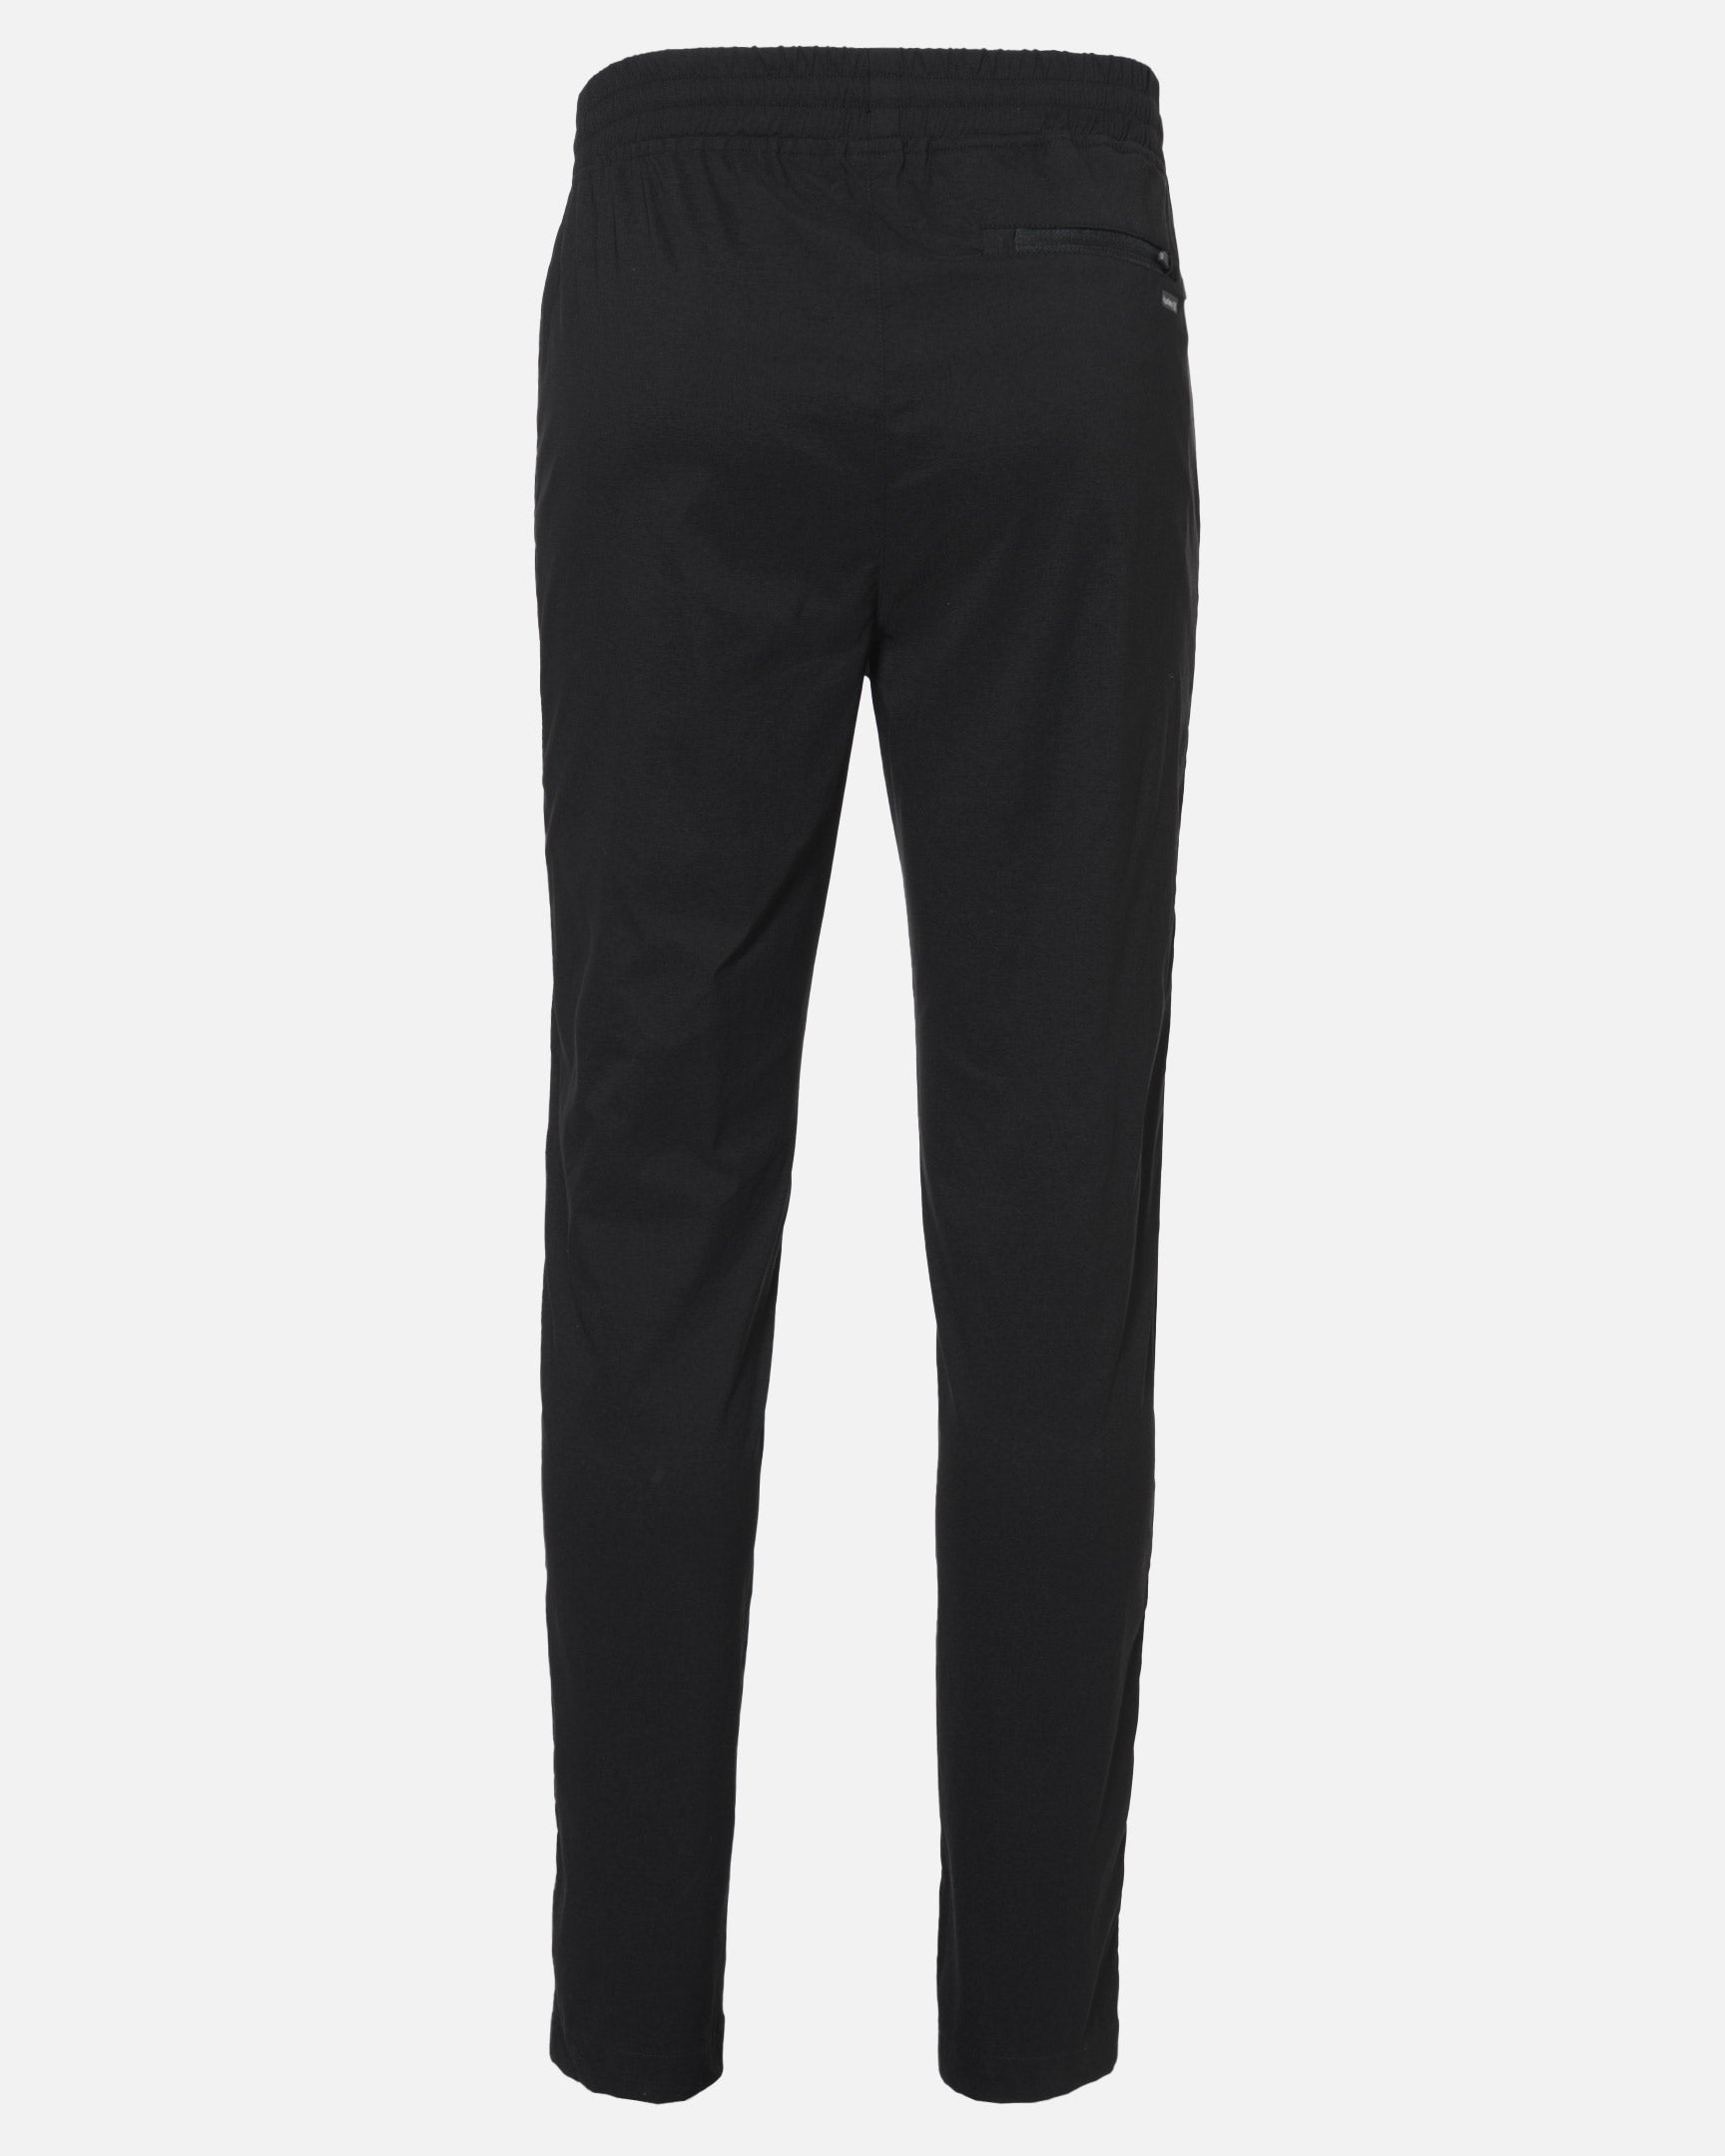 Black - Exist Tapered Pant